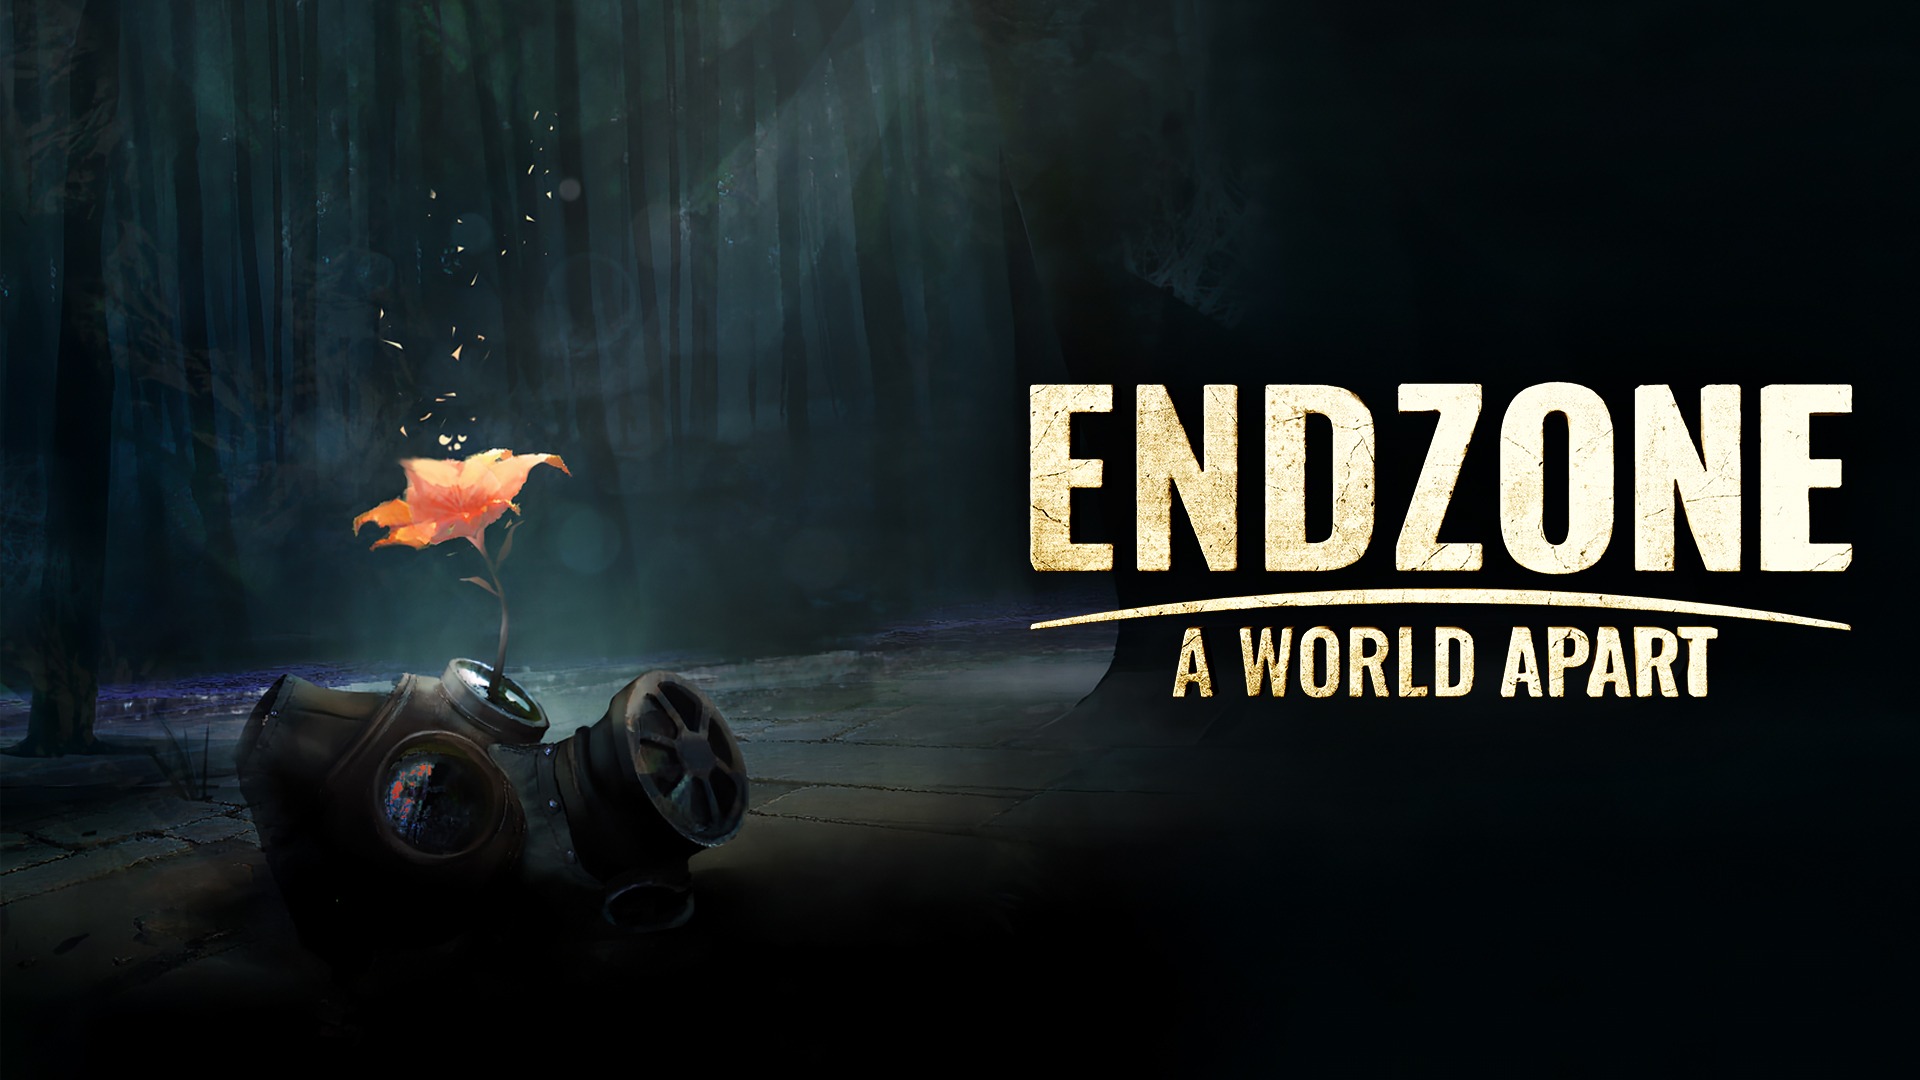 Endzone a warld apart Game News Indie Game Fans News